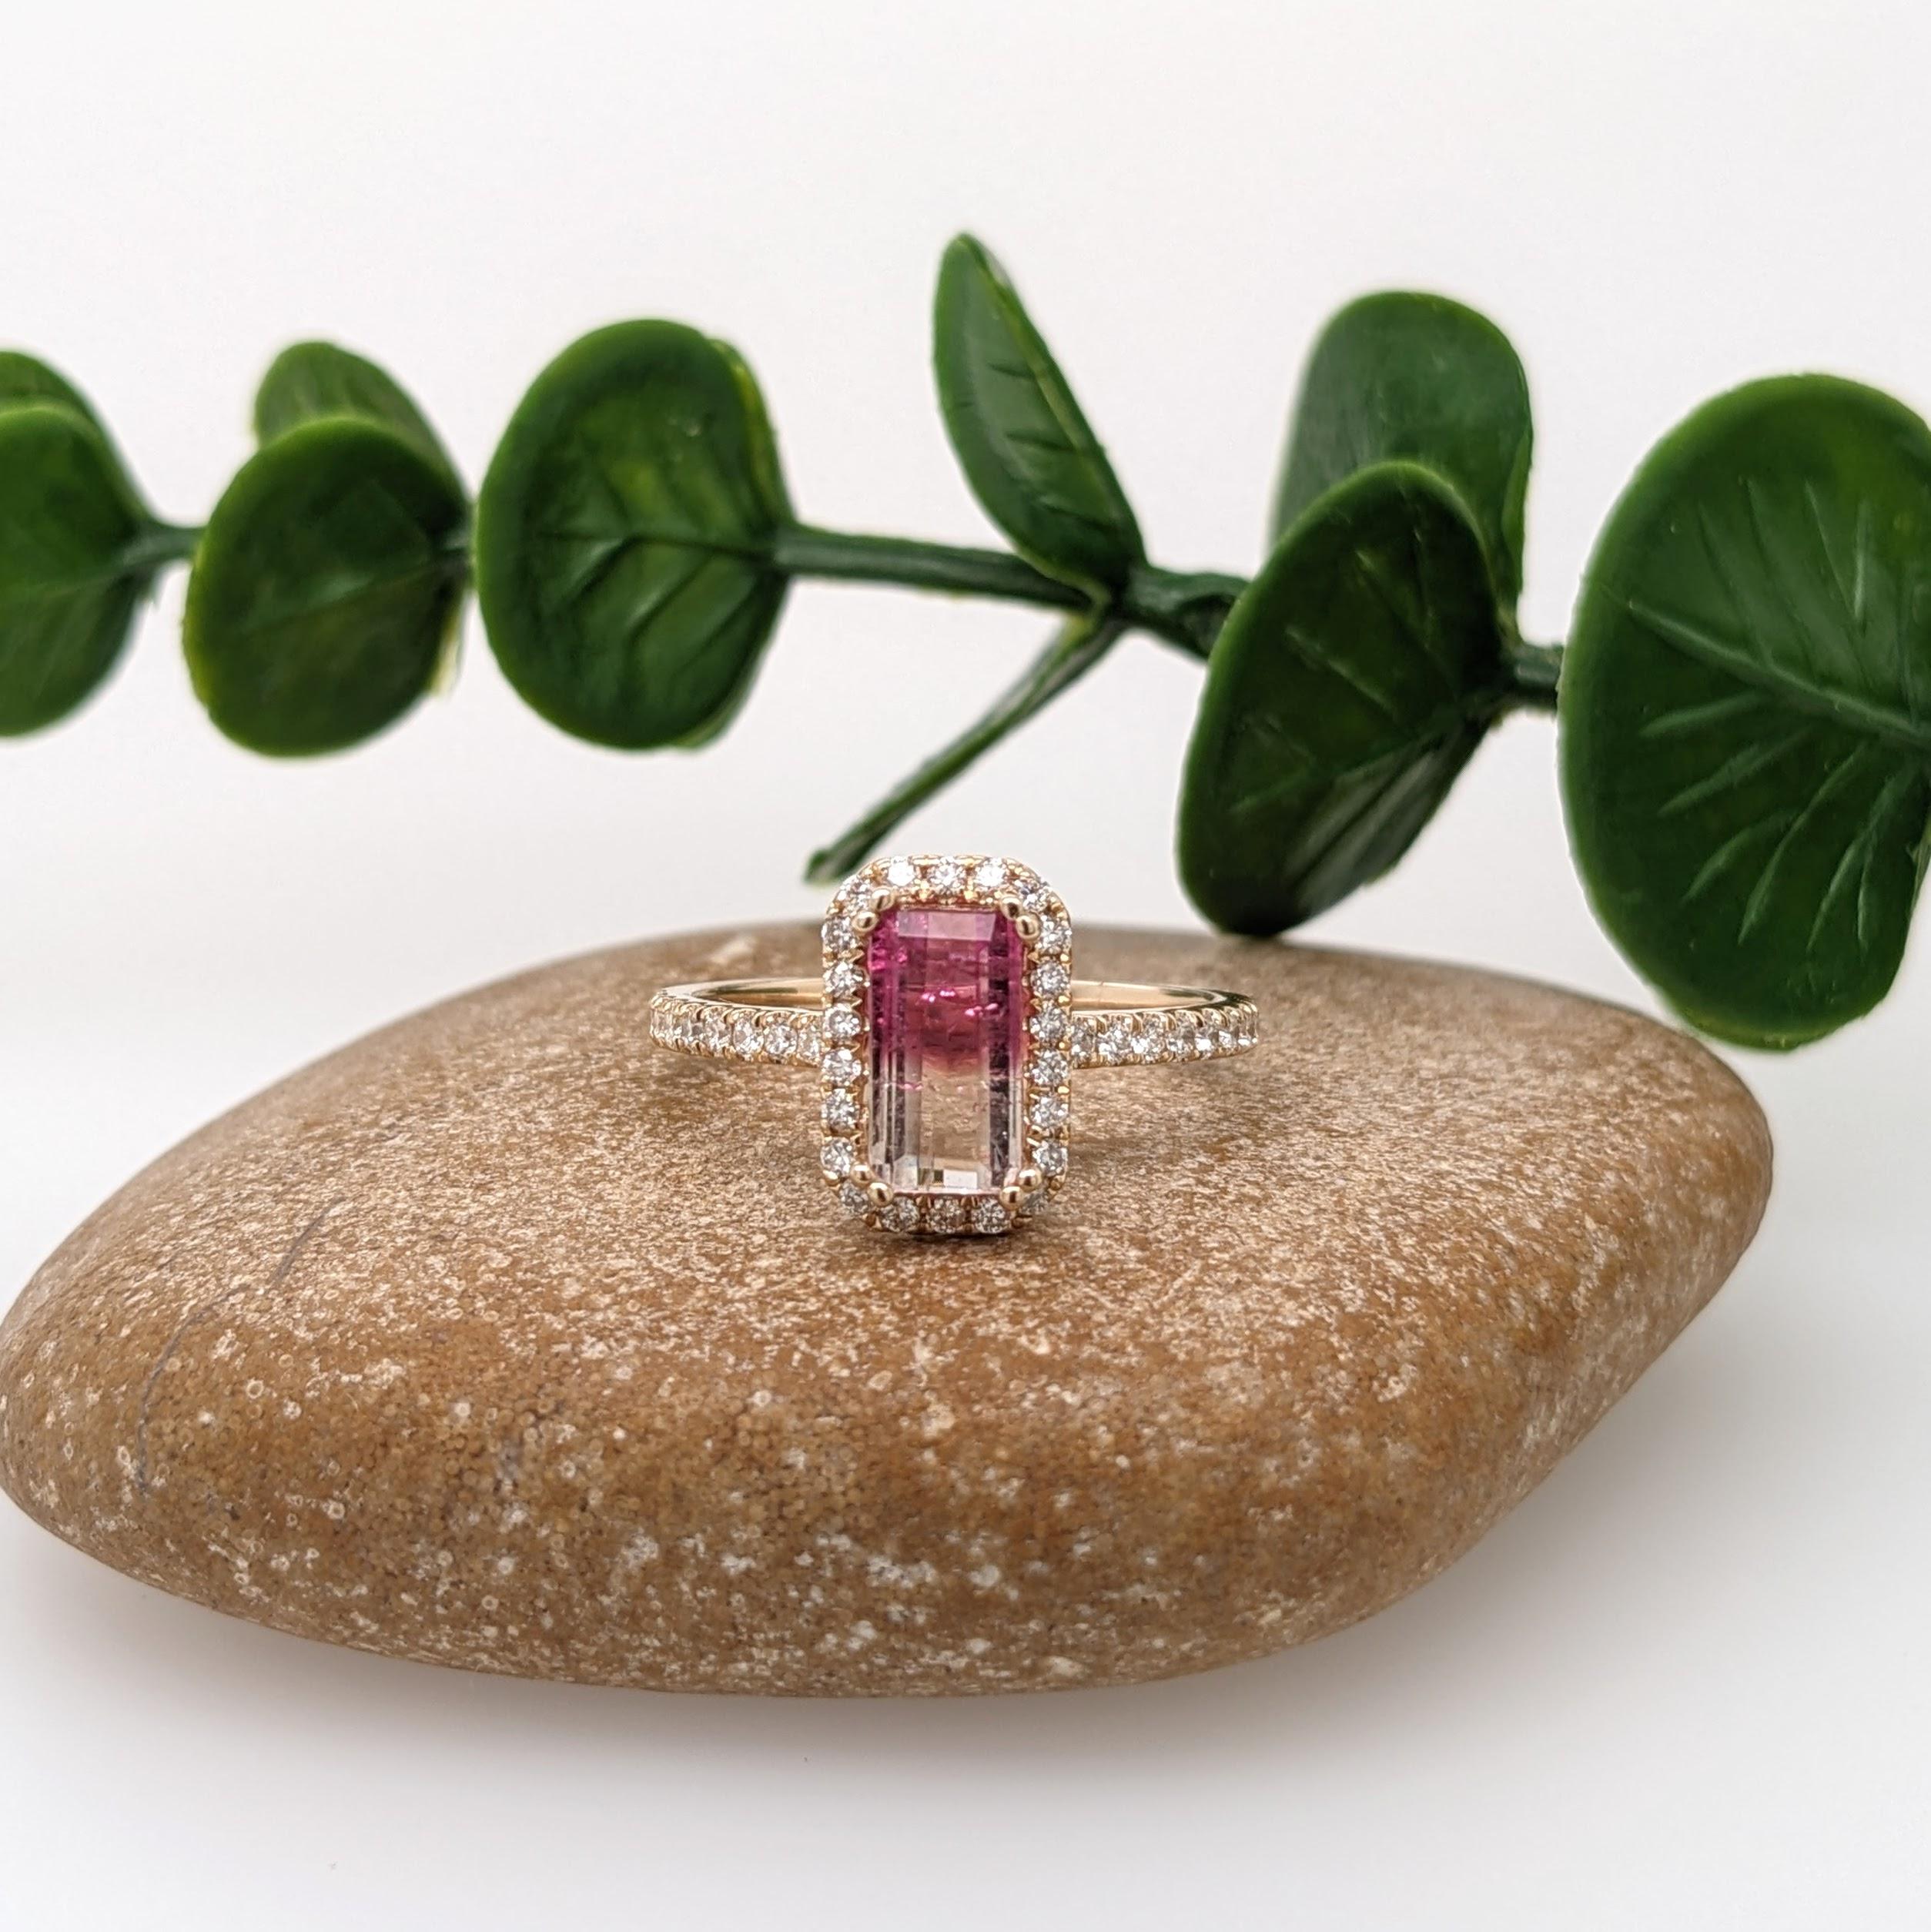 This ring features a beautiful pink and white bi-color tourmaline in a classic NNJ Designs halo ring setting with sparkling natural diamonds all set in 14k yellow gold. A gorgeous modern look that's perfectly balanced between minimalist and